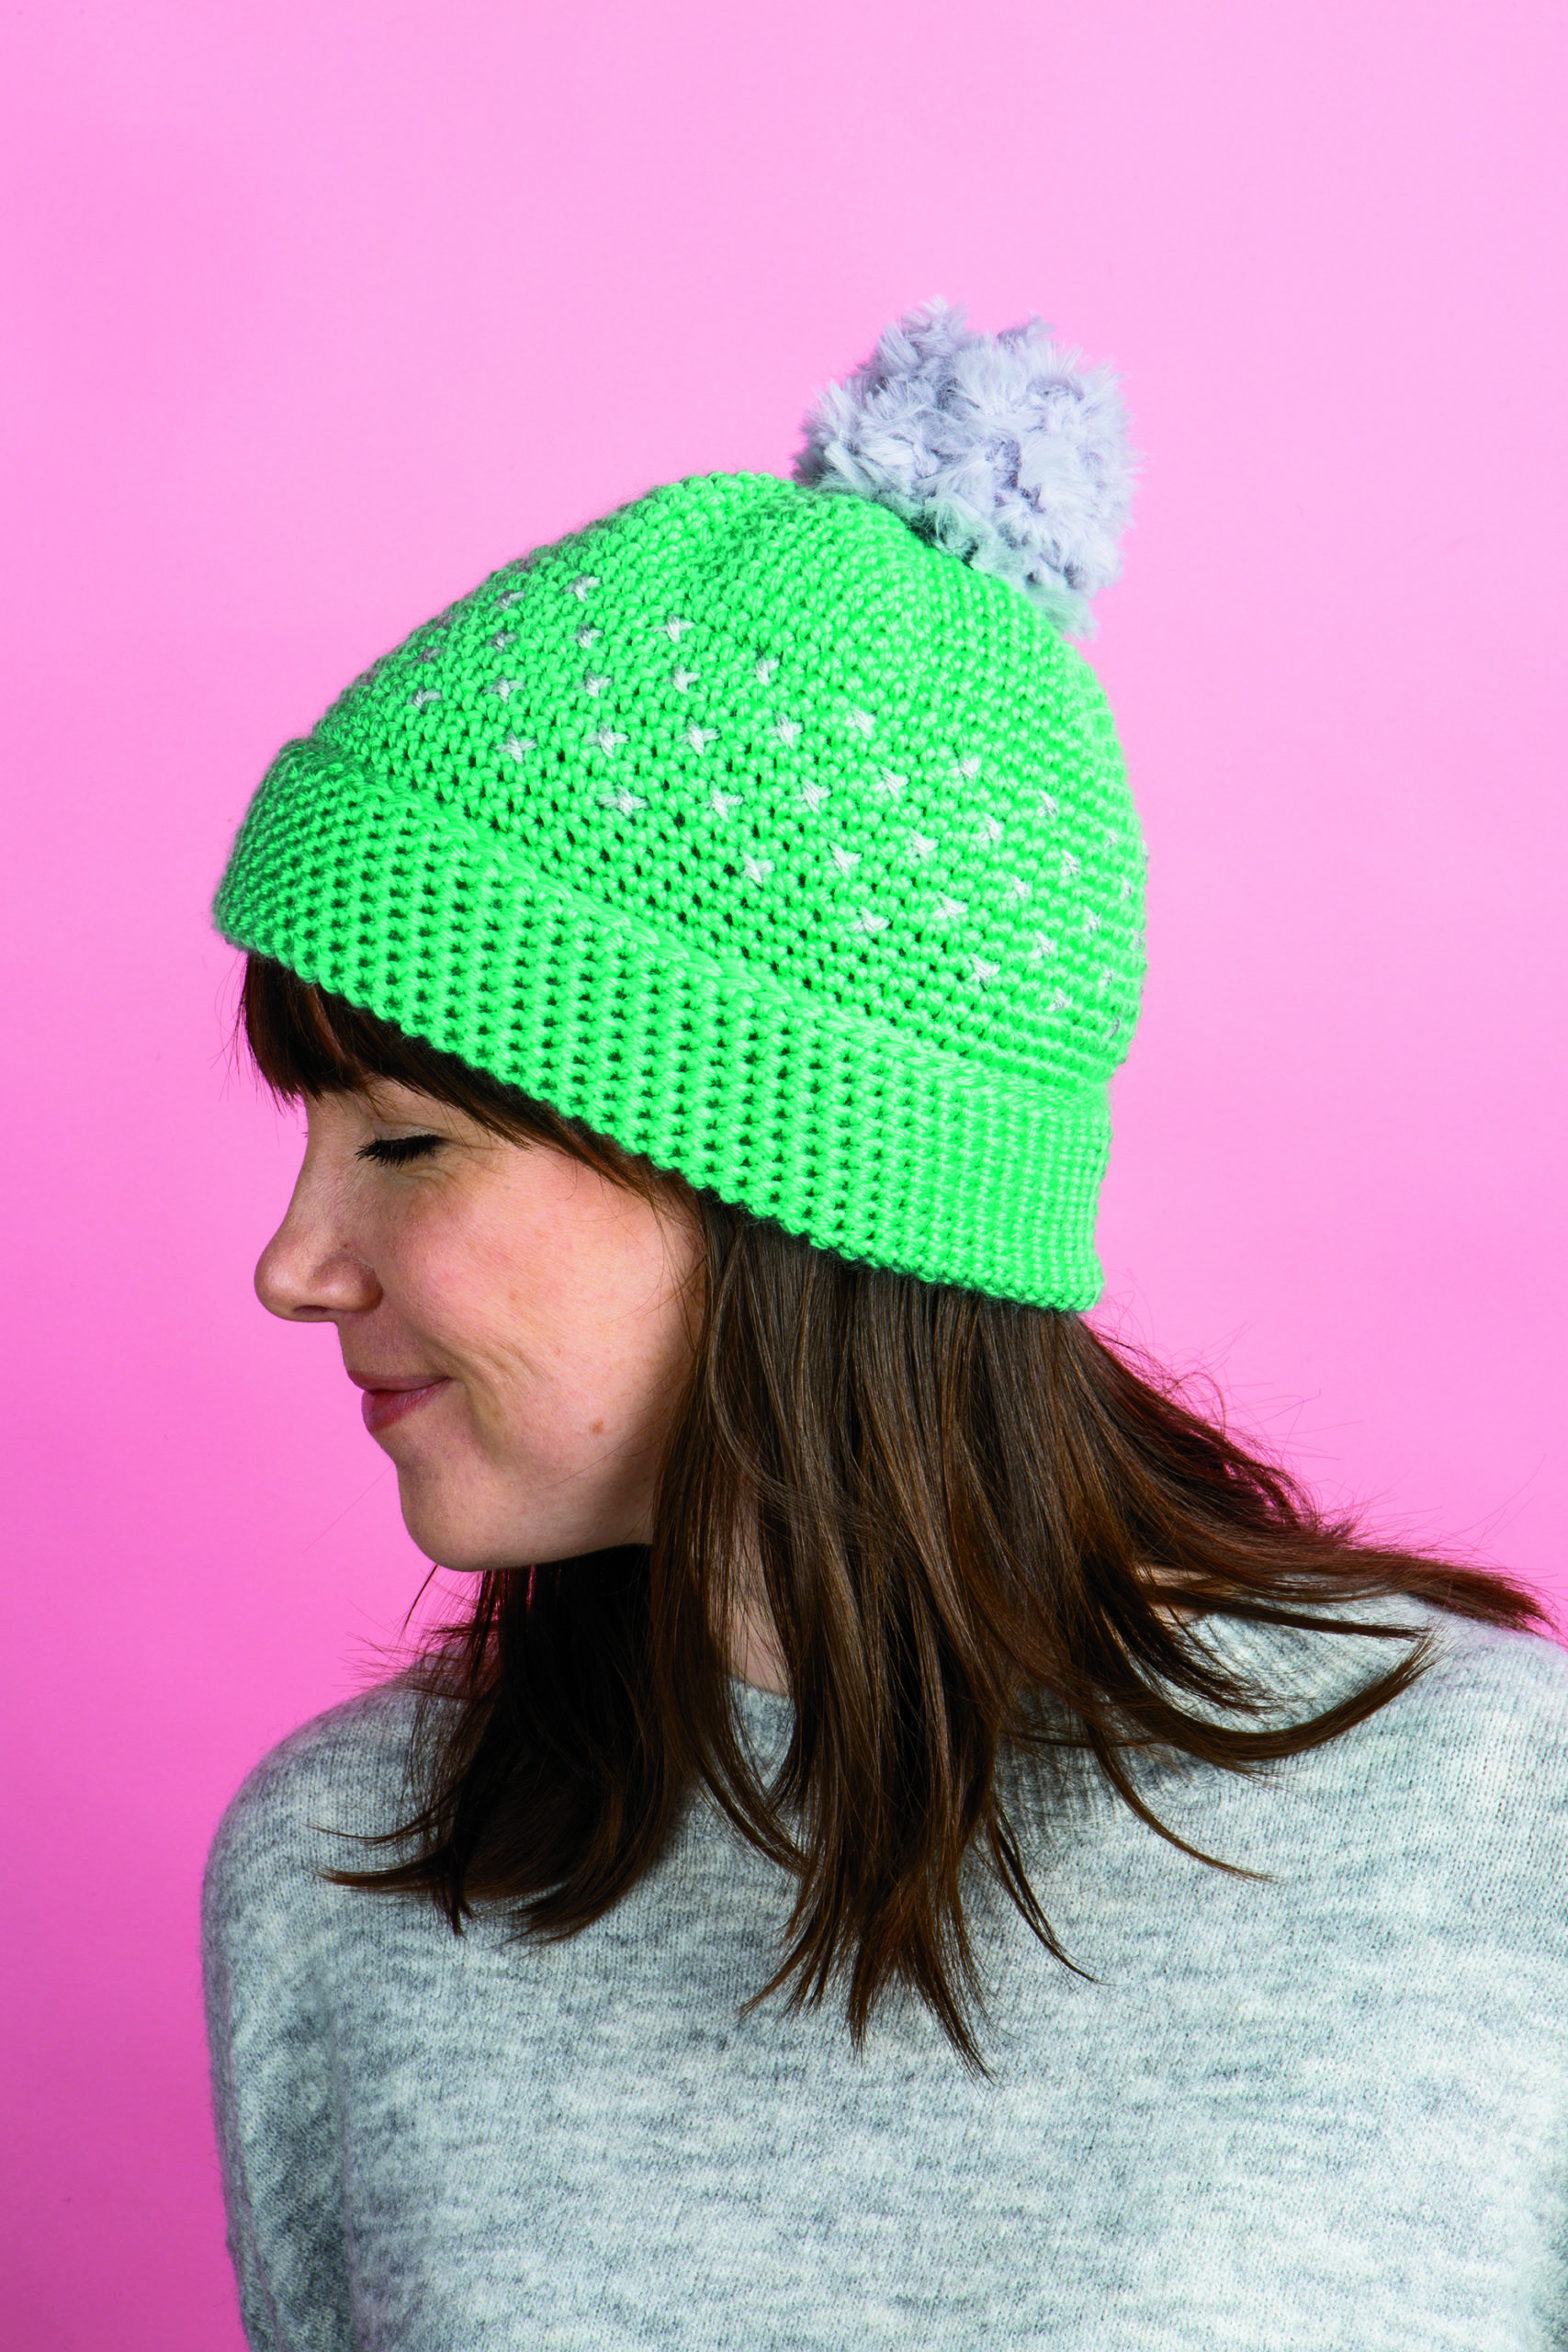 HOW TO ATTACH A FAUX FUR POMPOM ONTO YOUR HAT